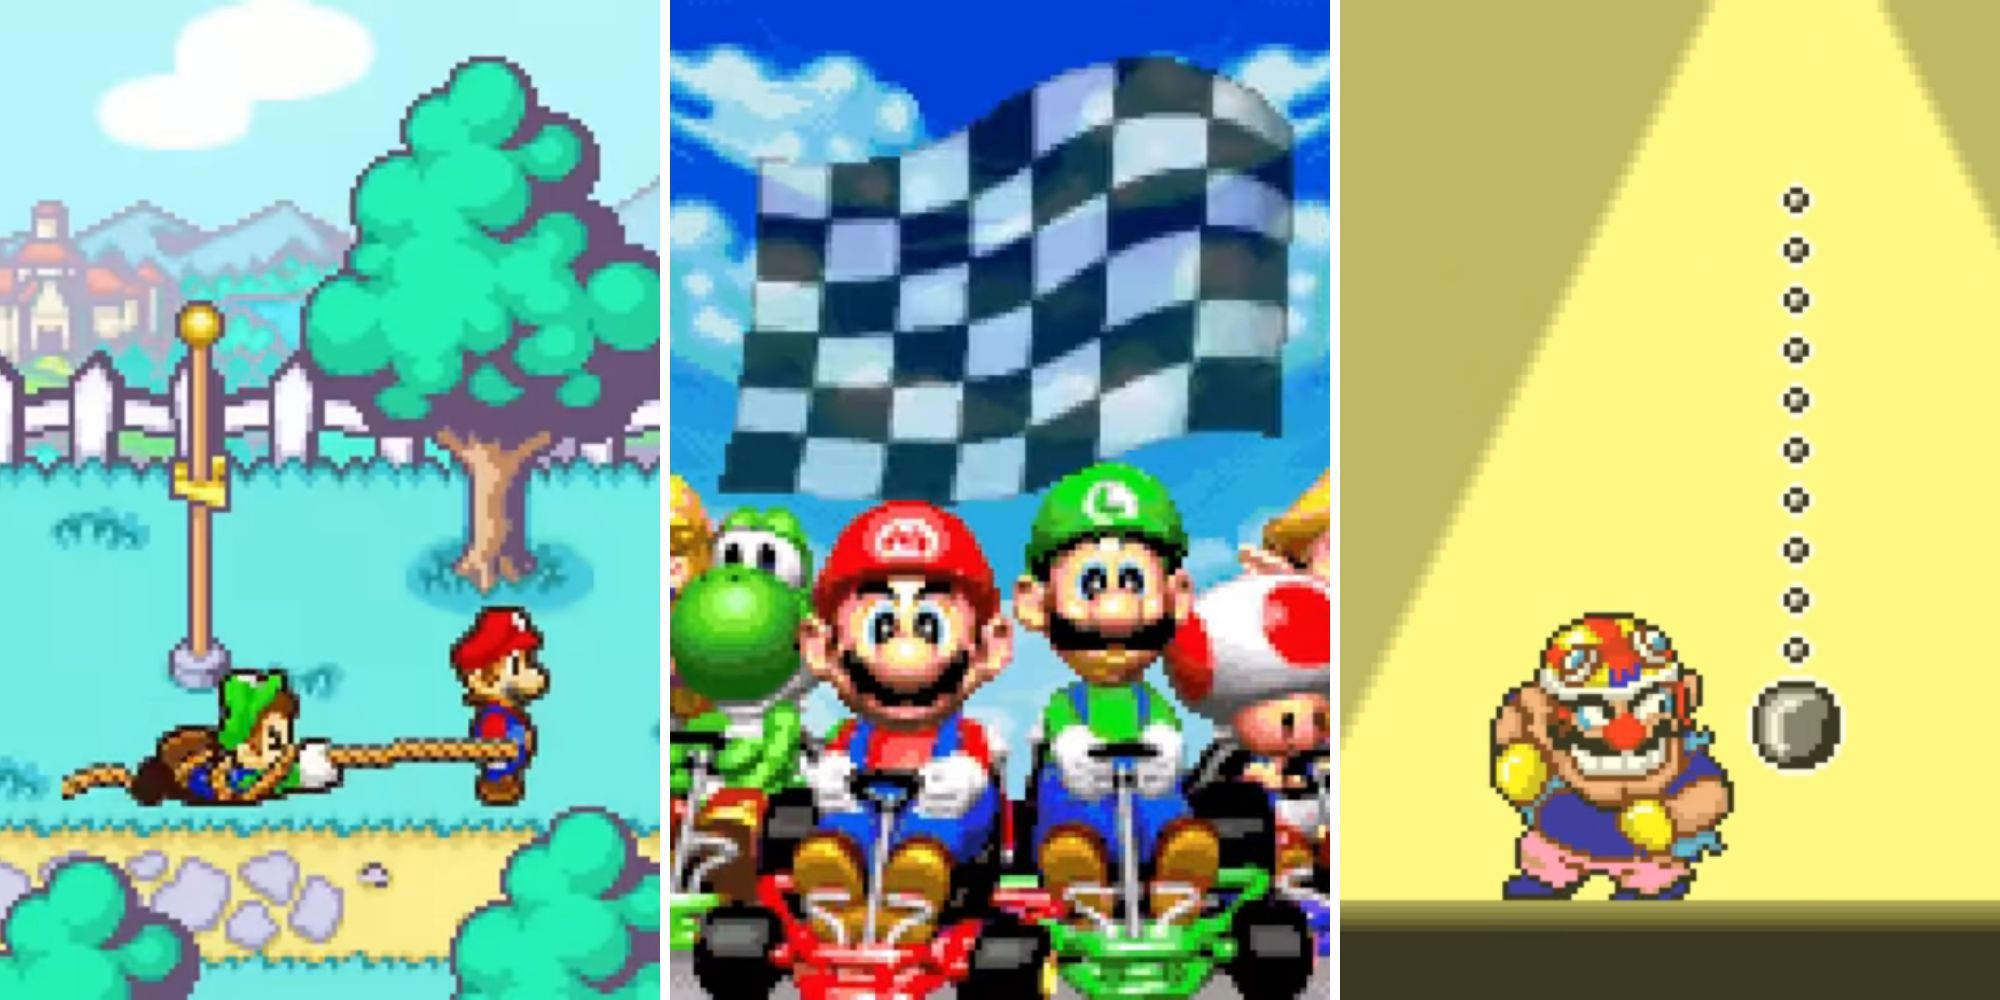 Mario drags Luigi across the ground with rope, Mario and Luigi sit in karts, Wario prepares to hit a punching bag